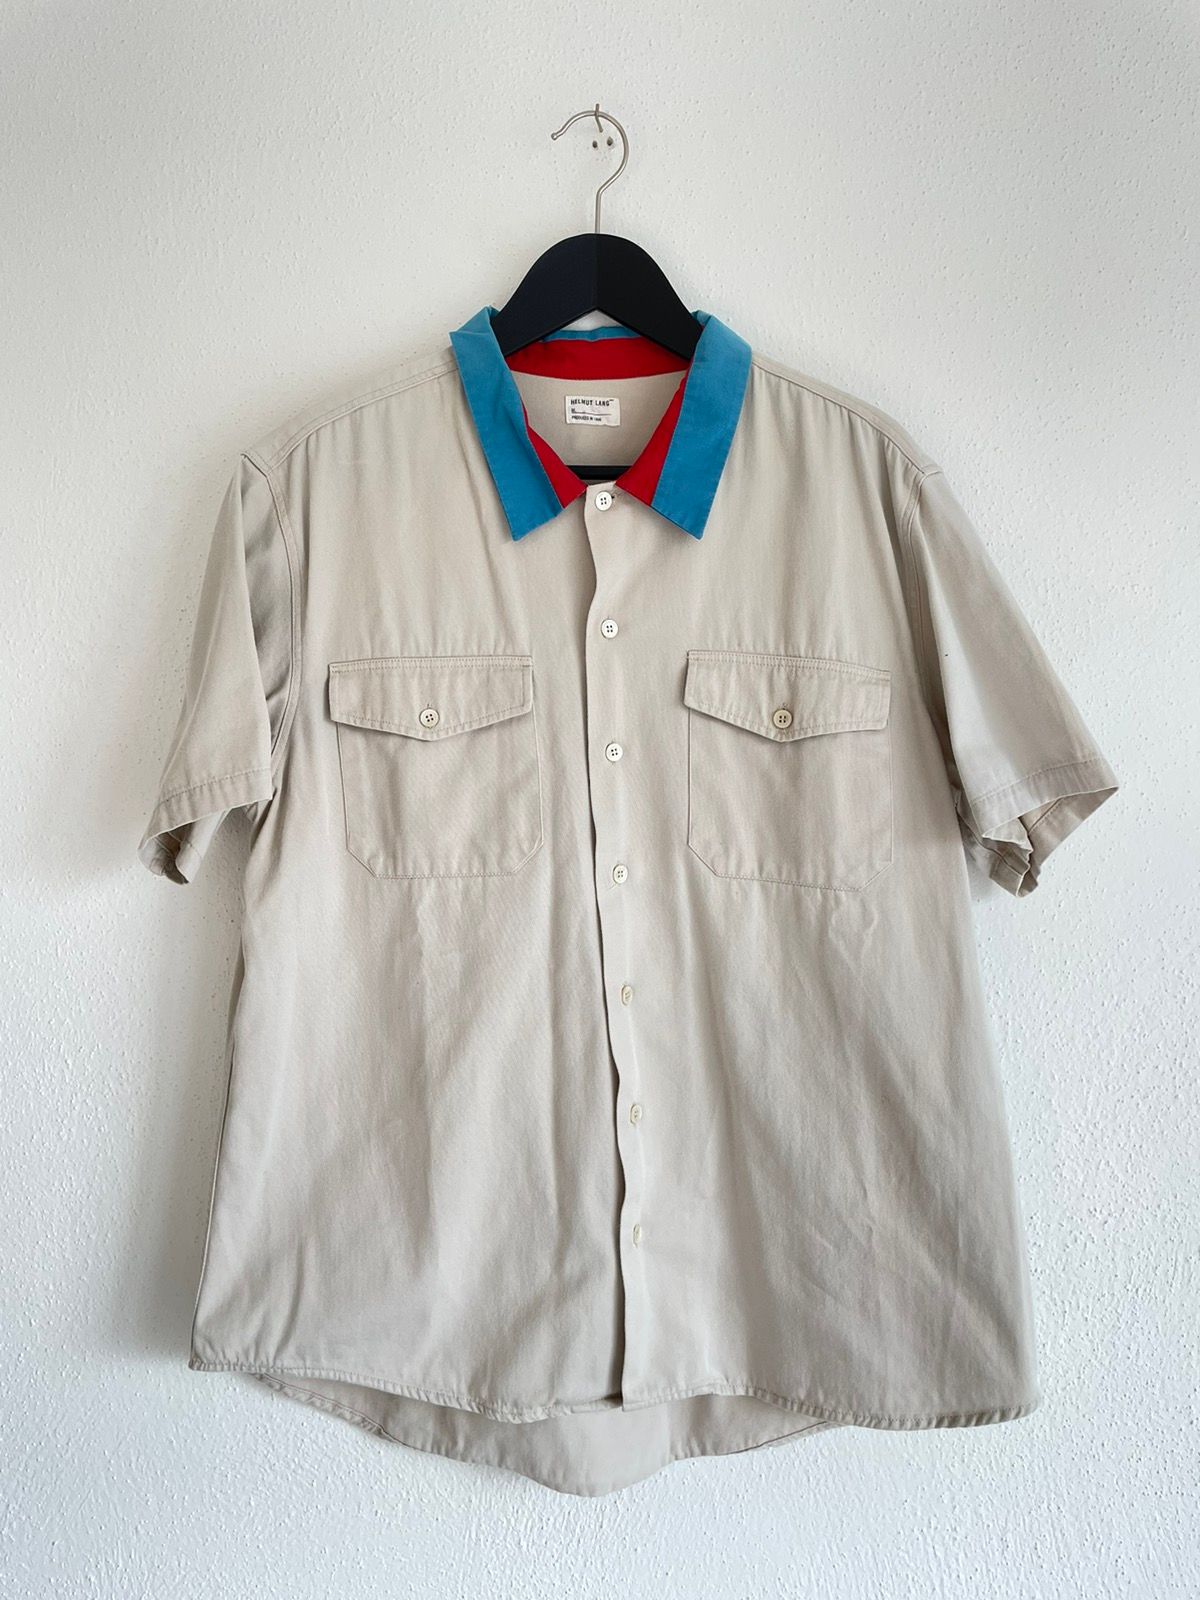 Pre-owned Helmut Lang Vintage 1996 Cream Striped Shirt With Red & Blue Collar